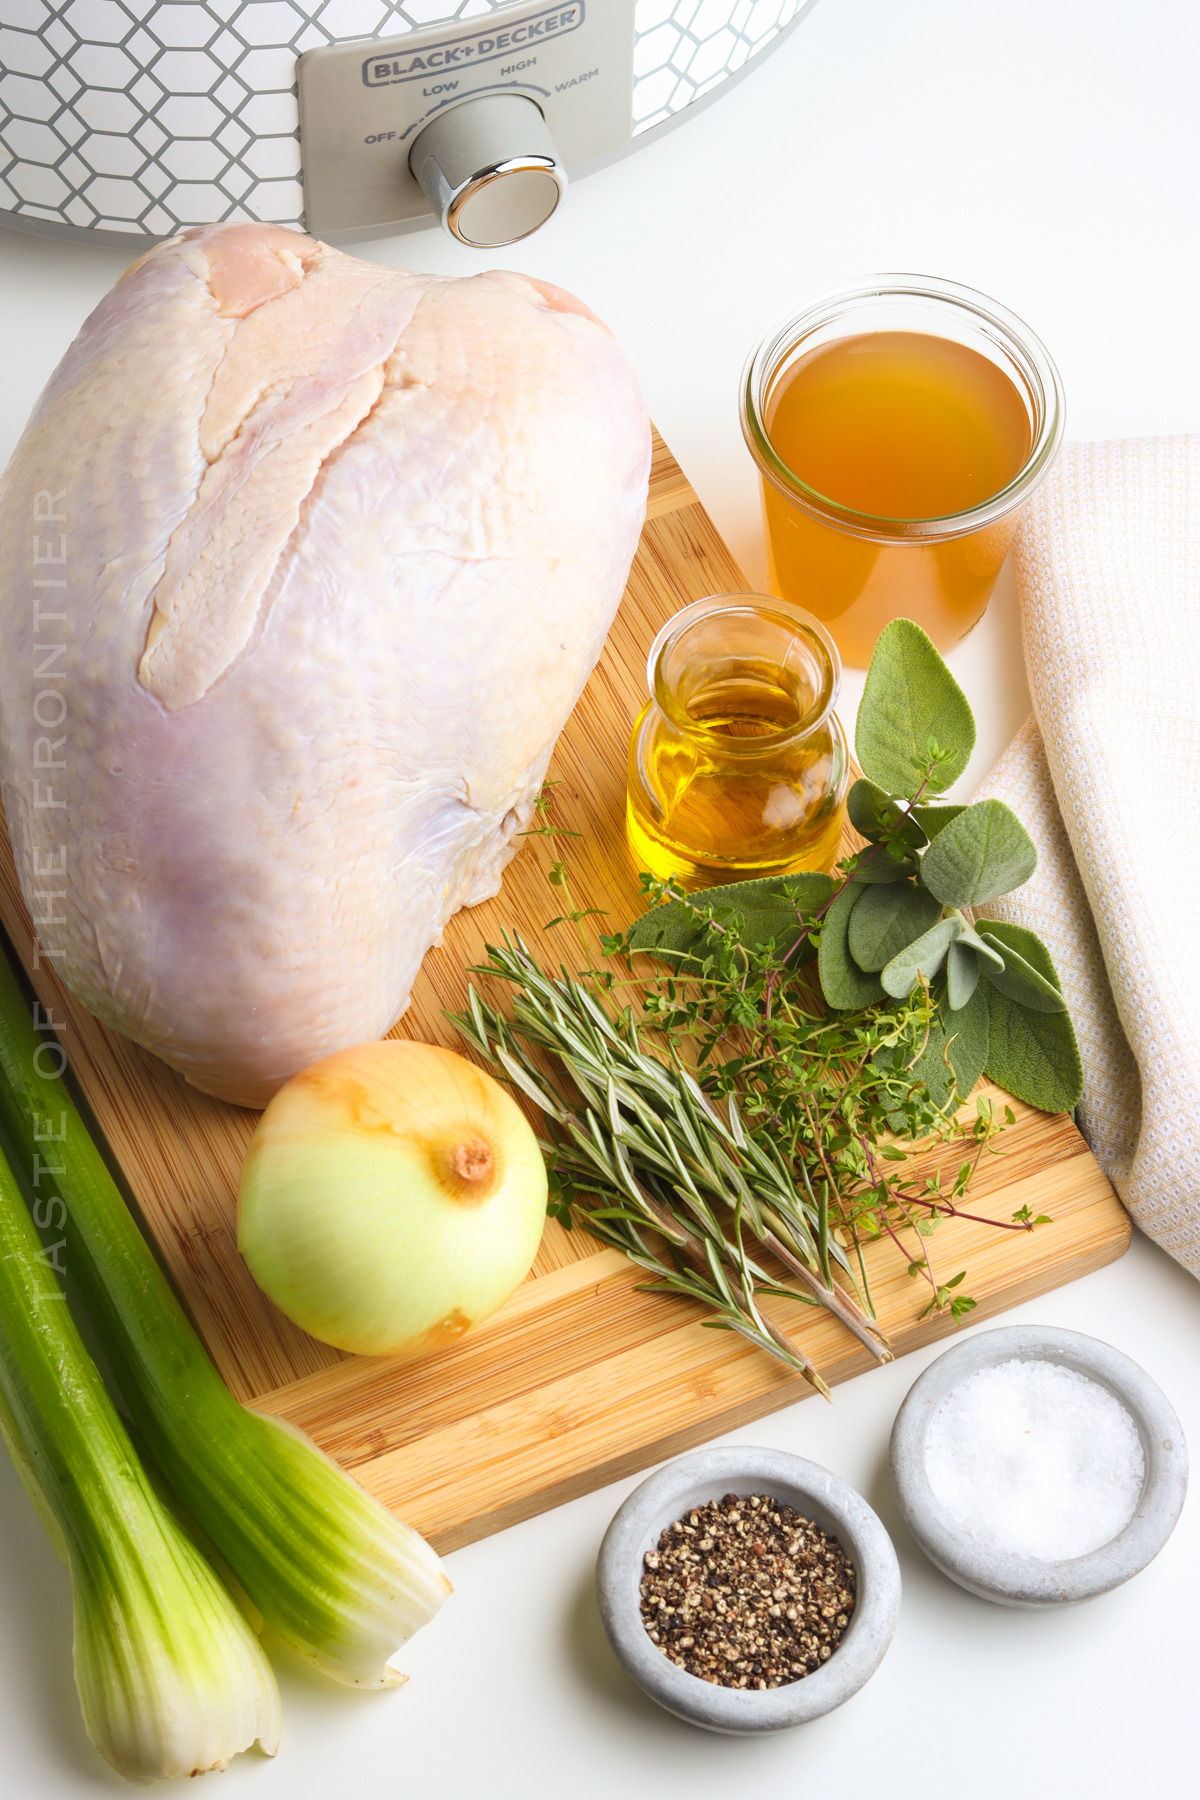 Ingredients for Slow Cooker Turkey Breast